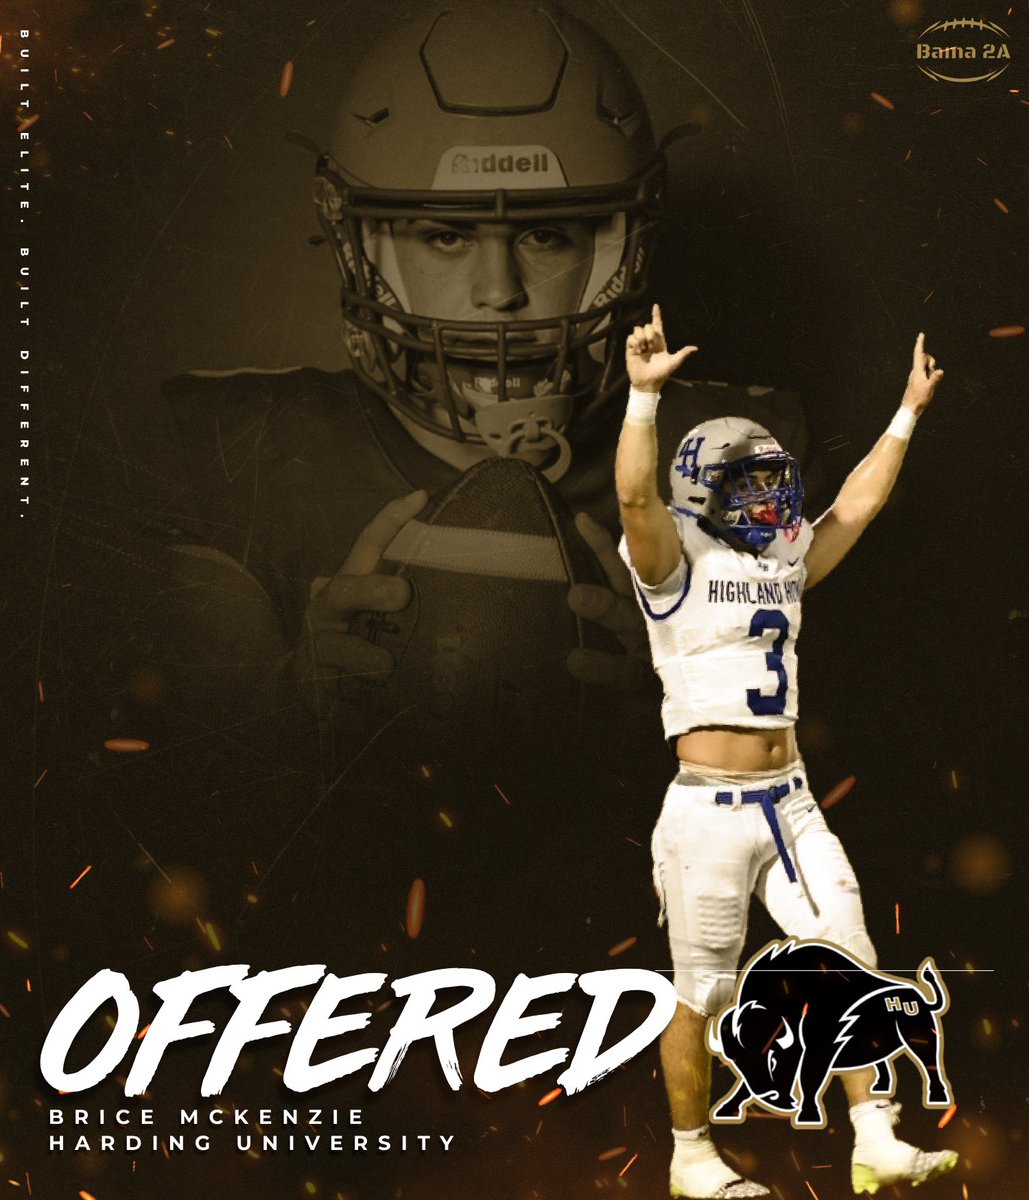 Congratulations to @BriceMckenzie4❗️ He was offered by @Harding_FB❗️